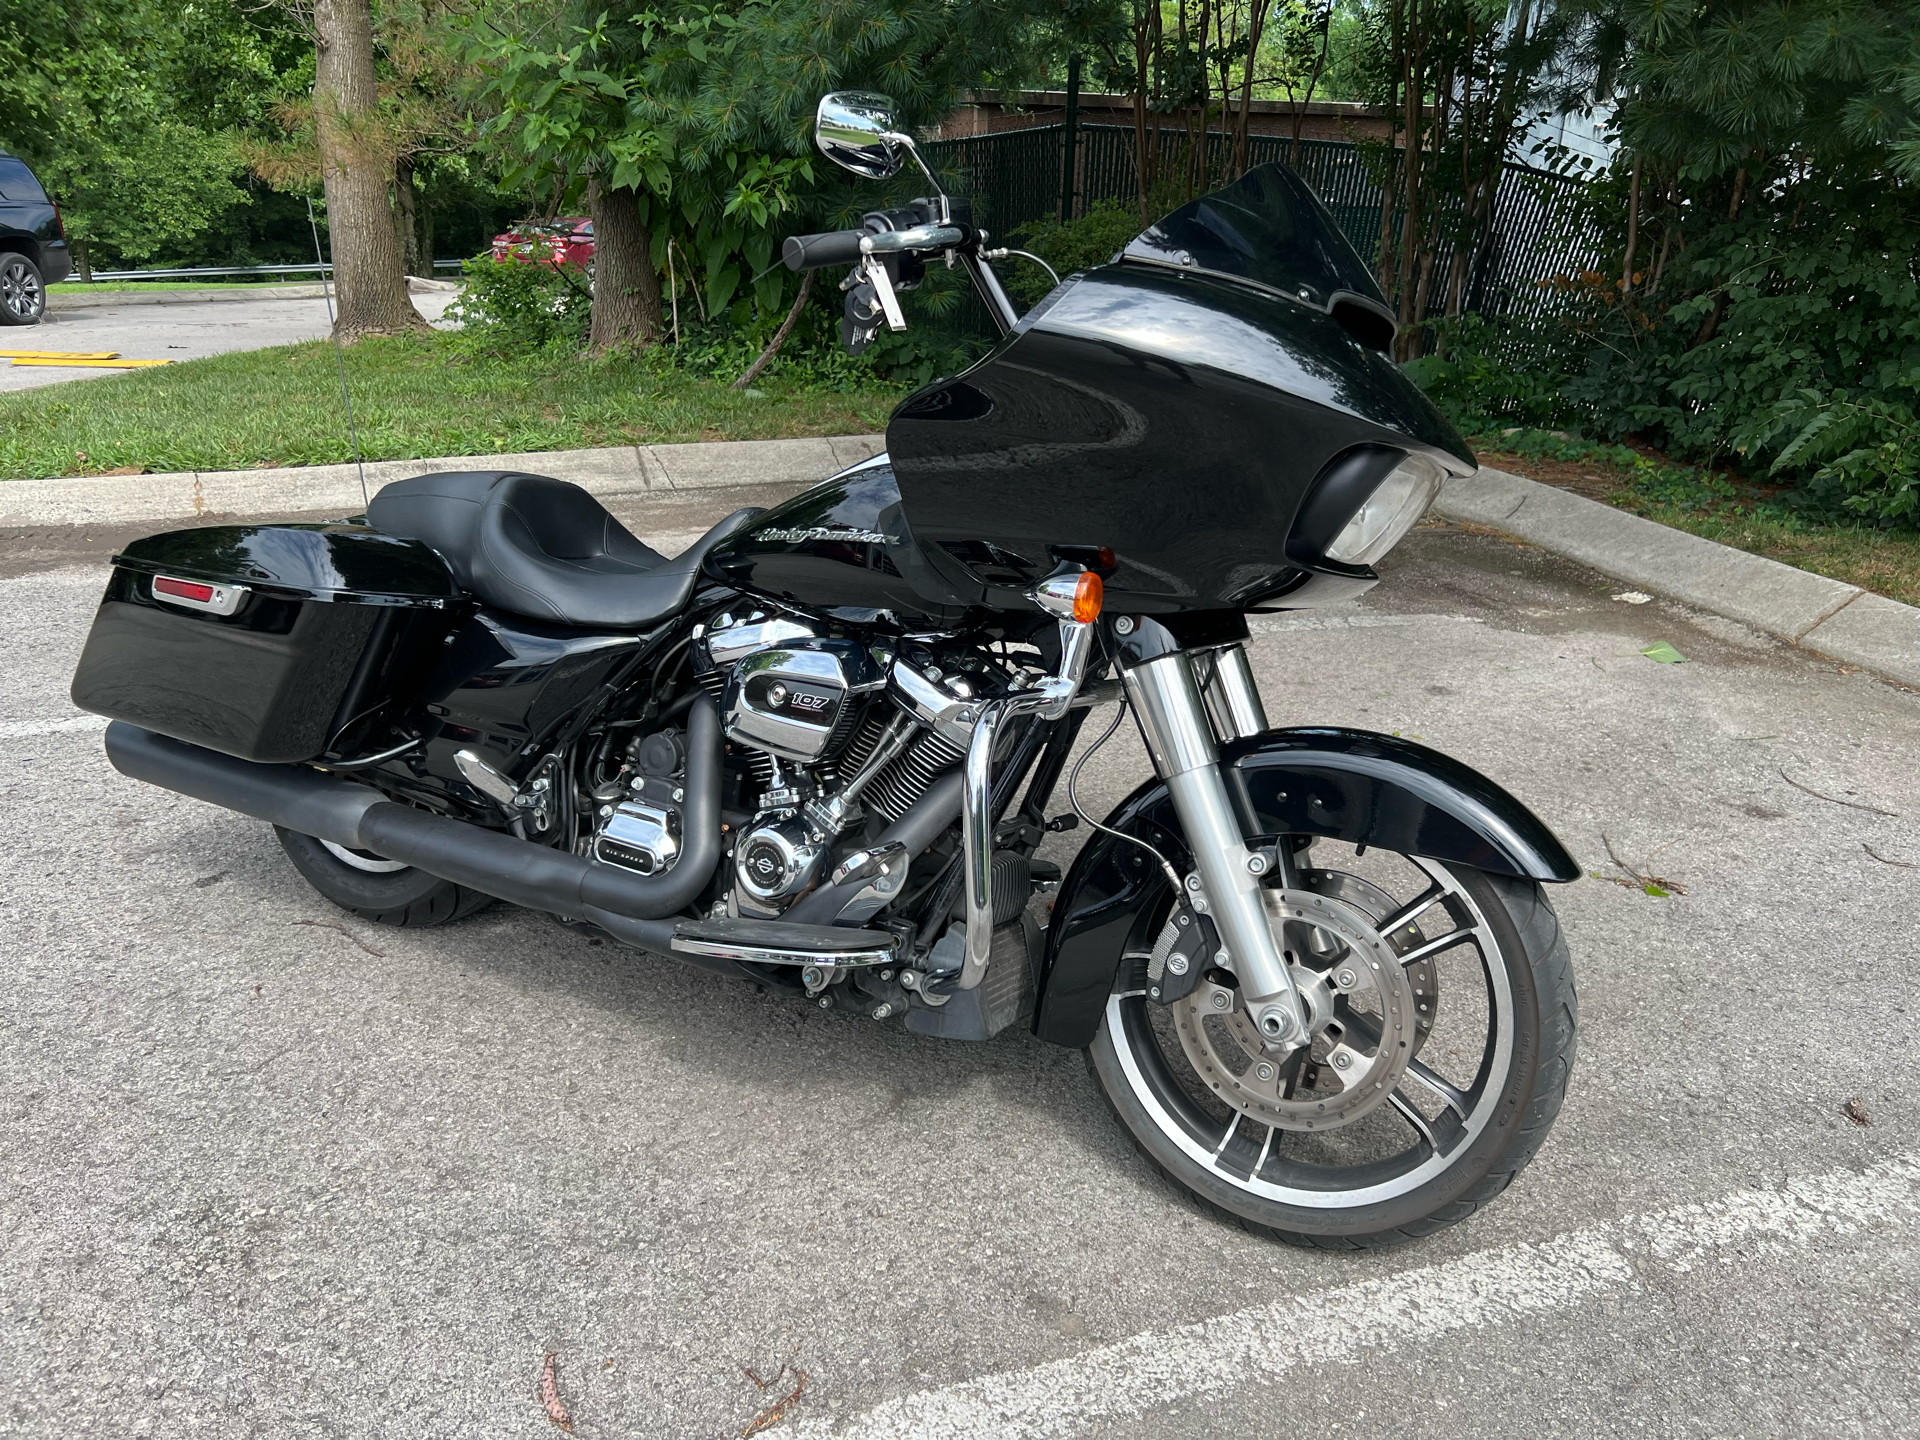 2017 Harley-Davidson Road Glide® Special in Franklin, Tennessee - Photo 4